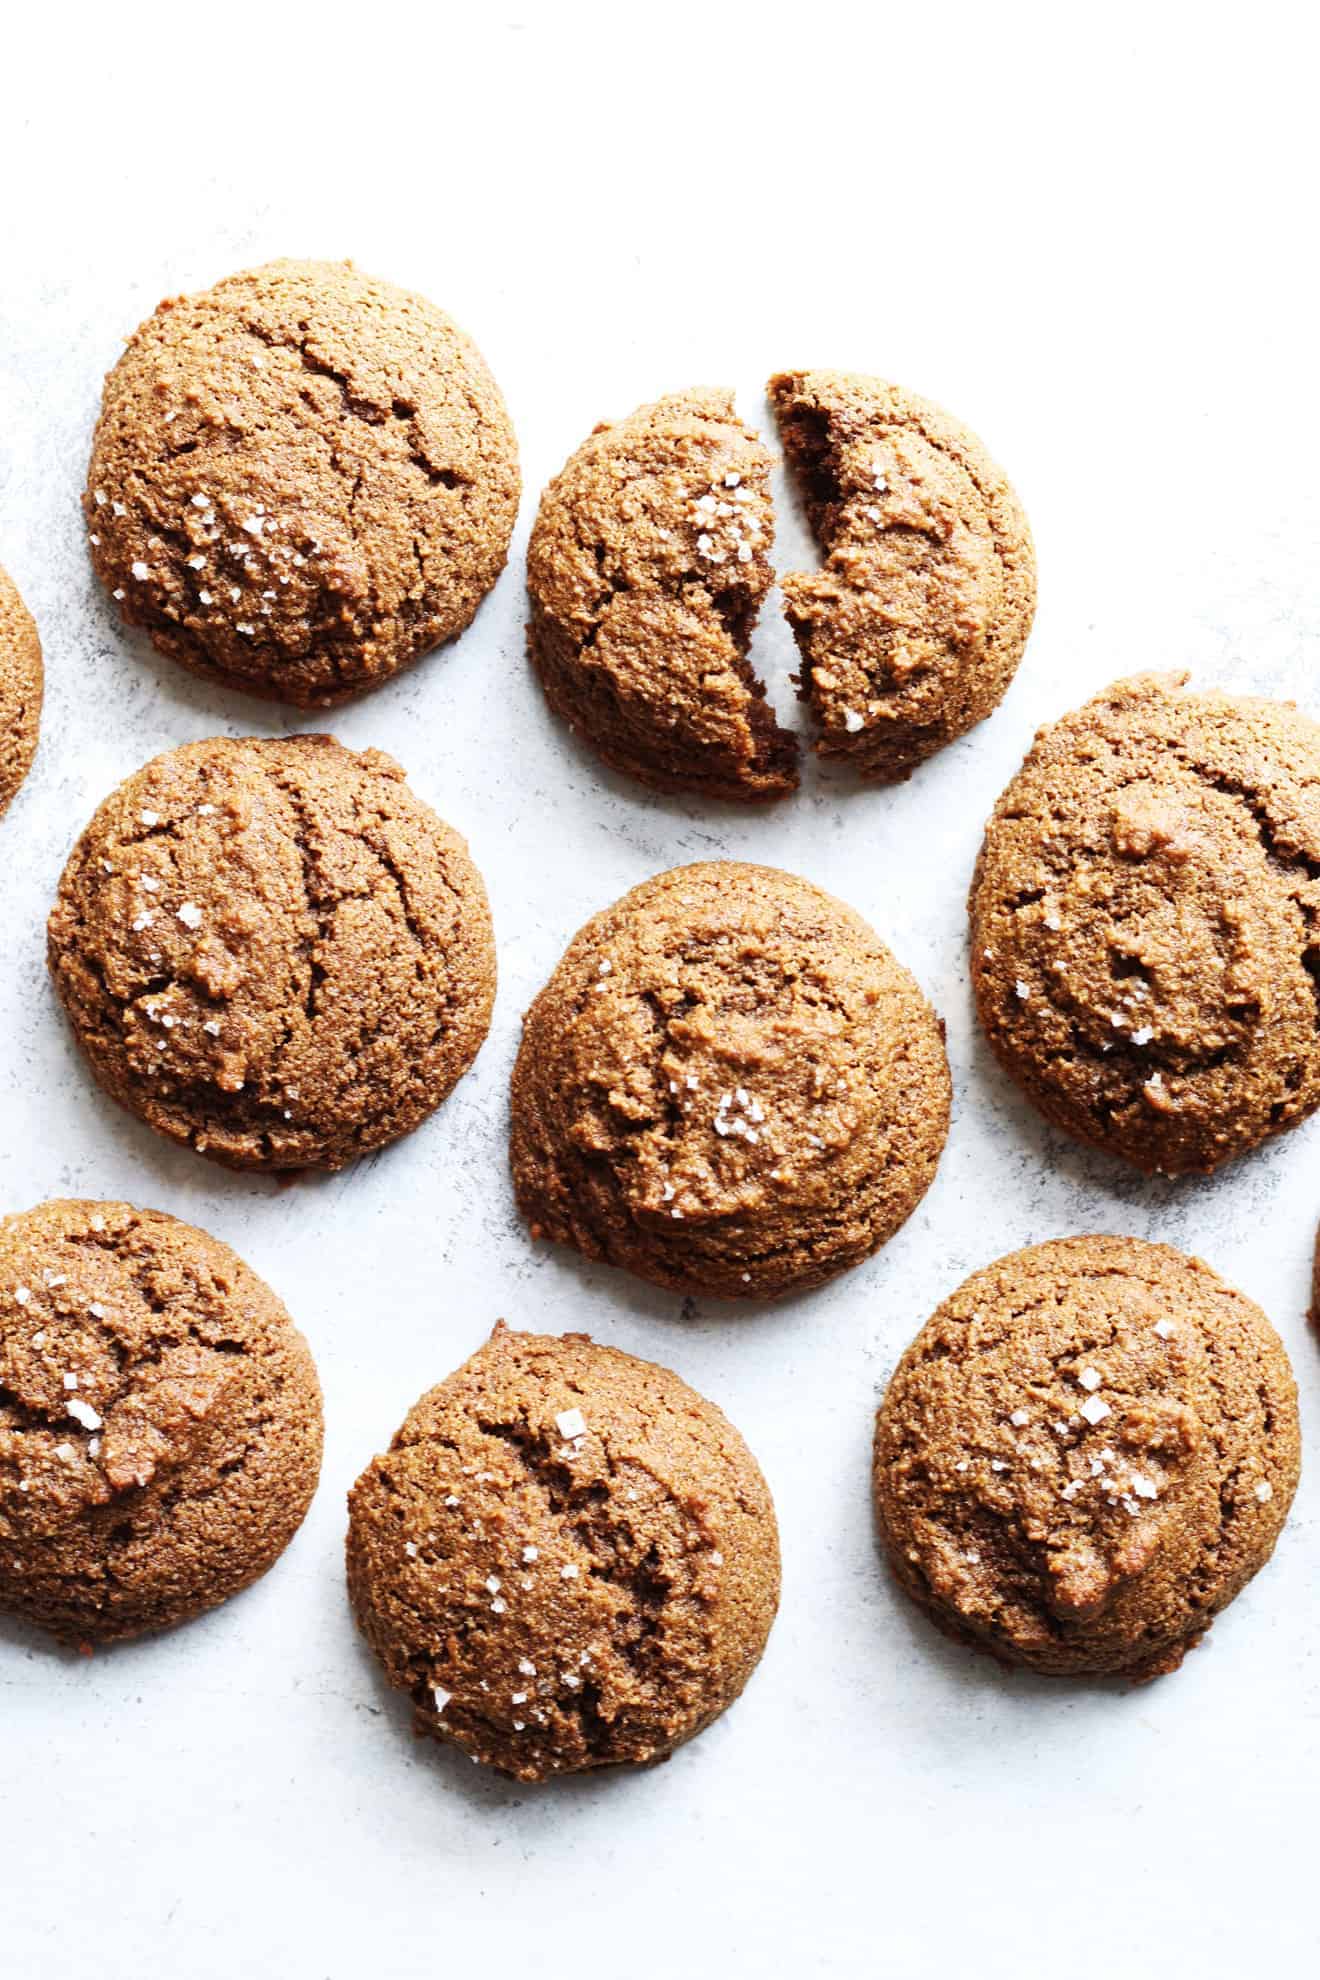 overhead image of a group of Soft Baked Ginger Molasses Cookies on a white counter, one is broken in half and laying in the group of cookies